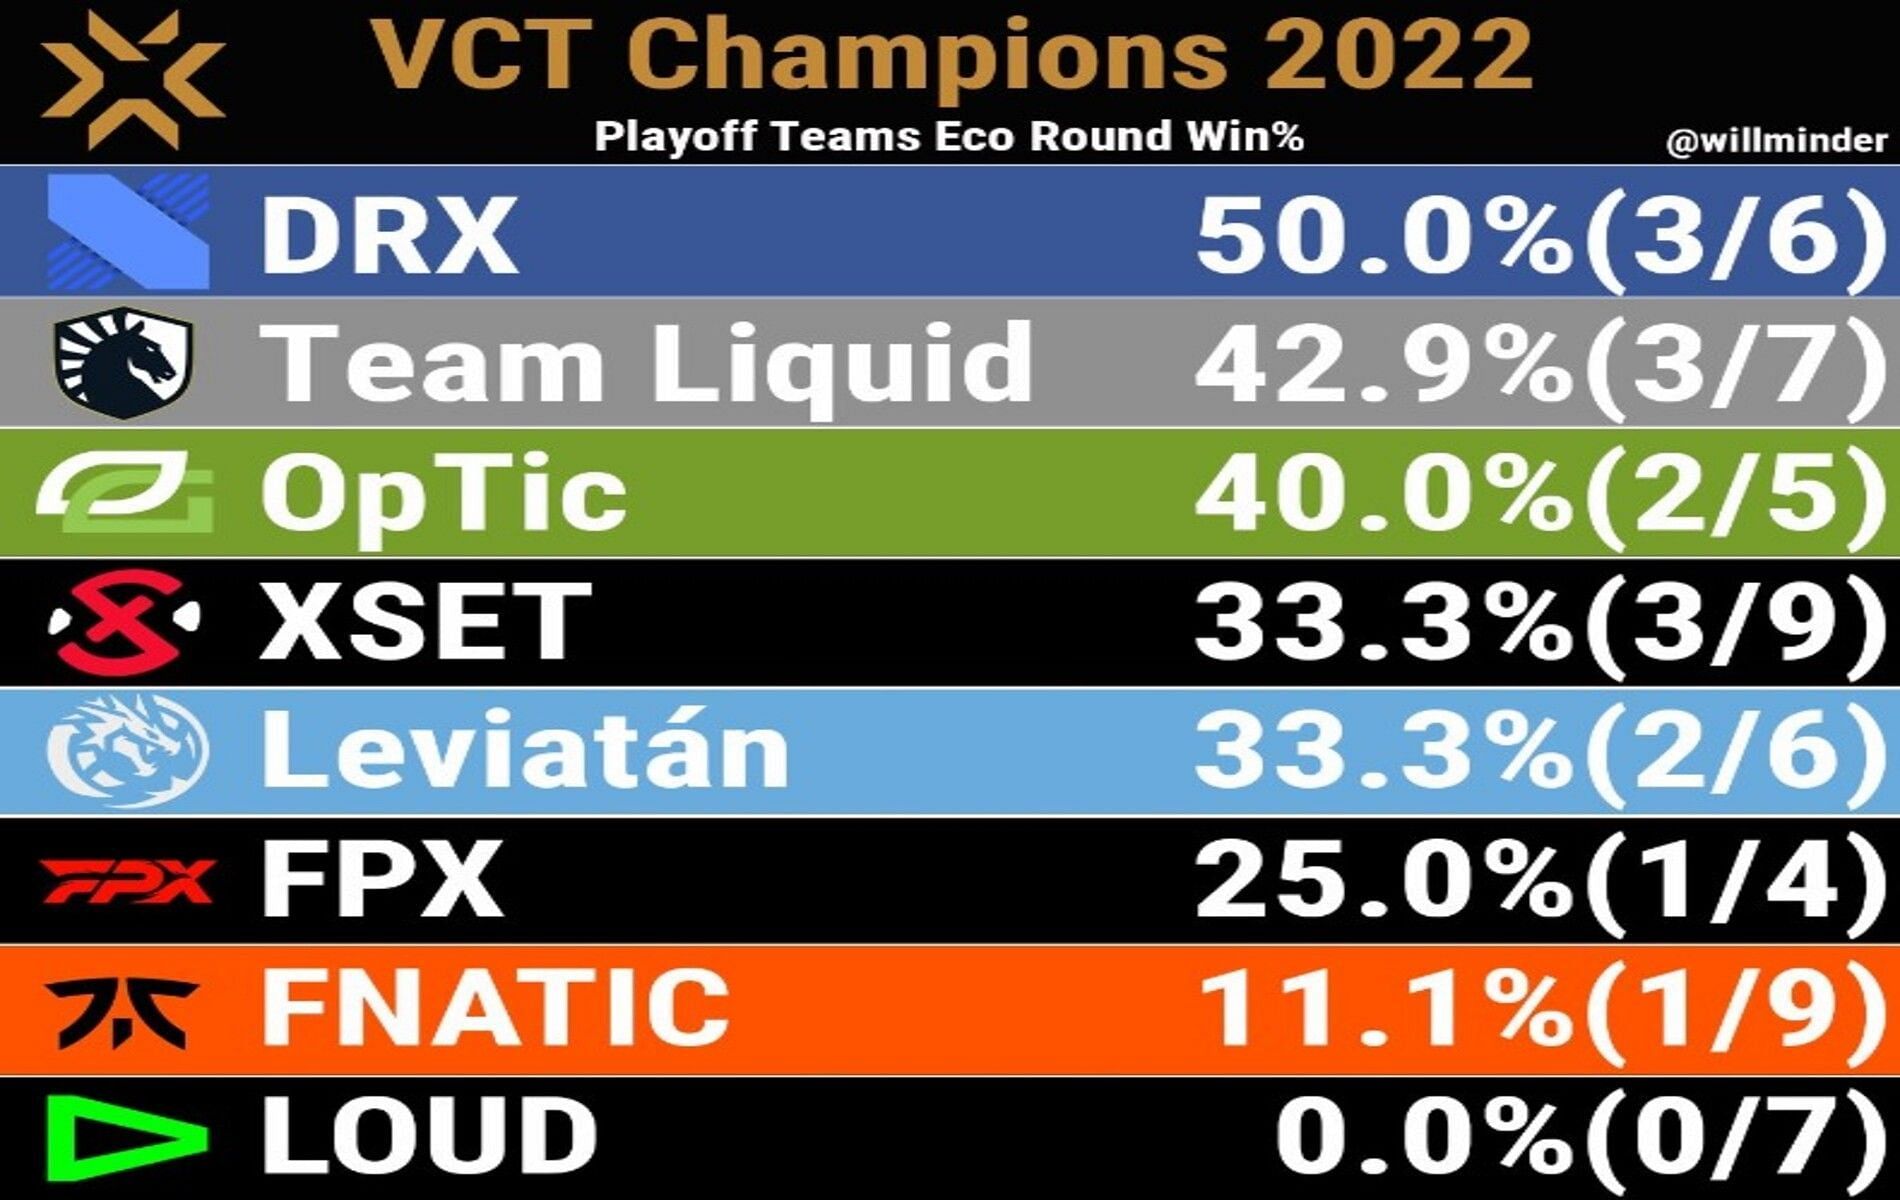 VCT Champions 2022 Istanbul: All playoff teams ranked on pistol